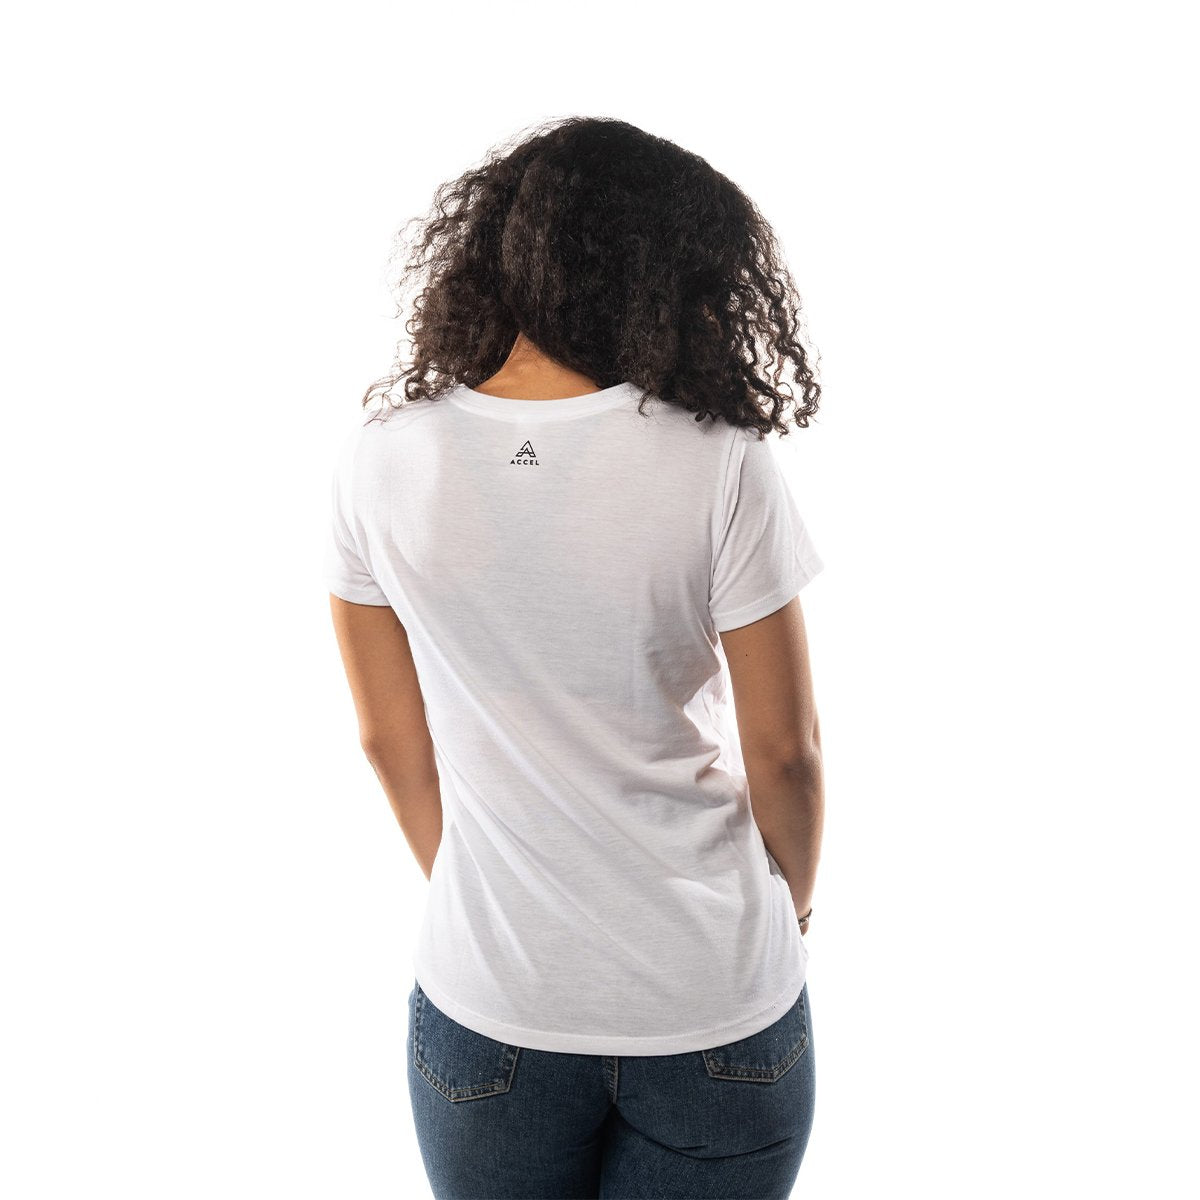 Women's Self-Cleaning Timeless Tee